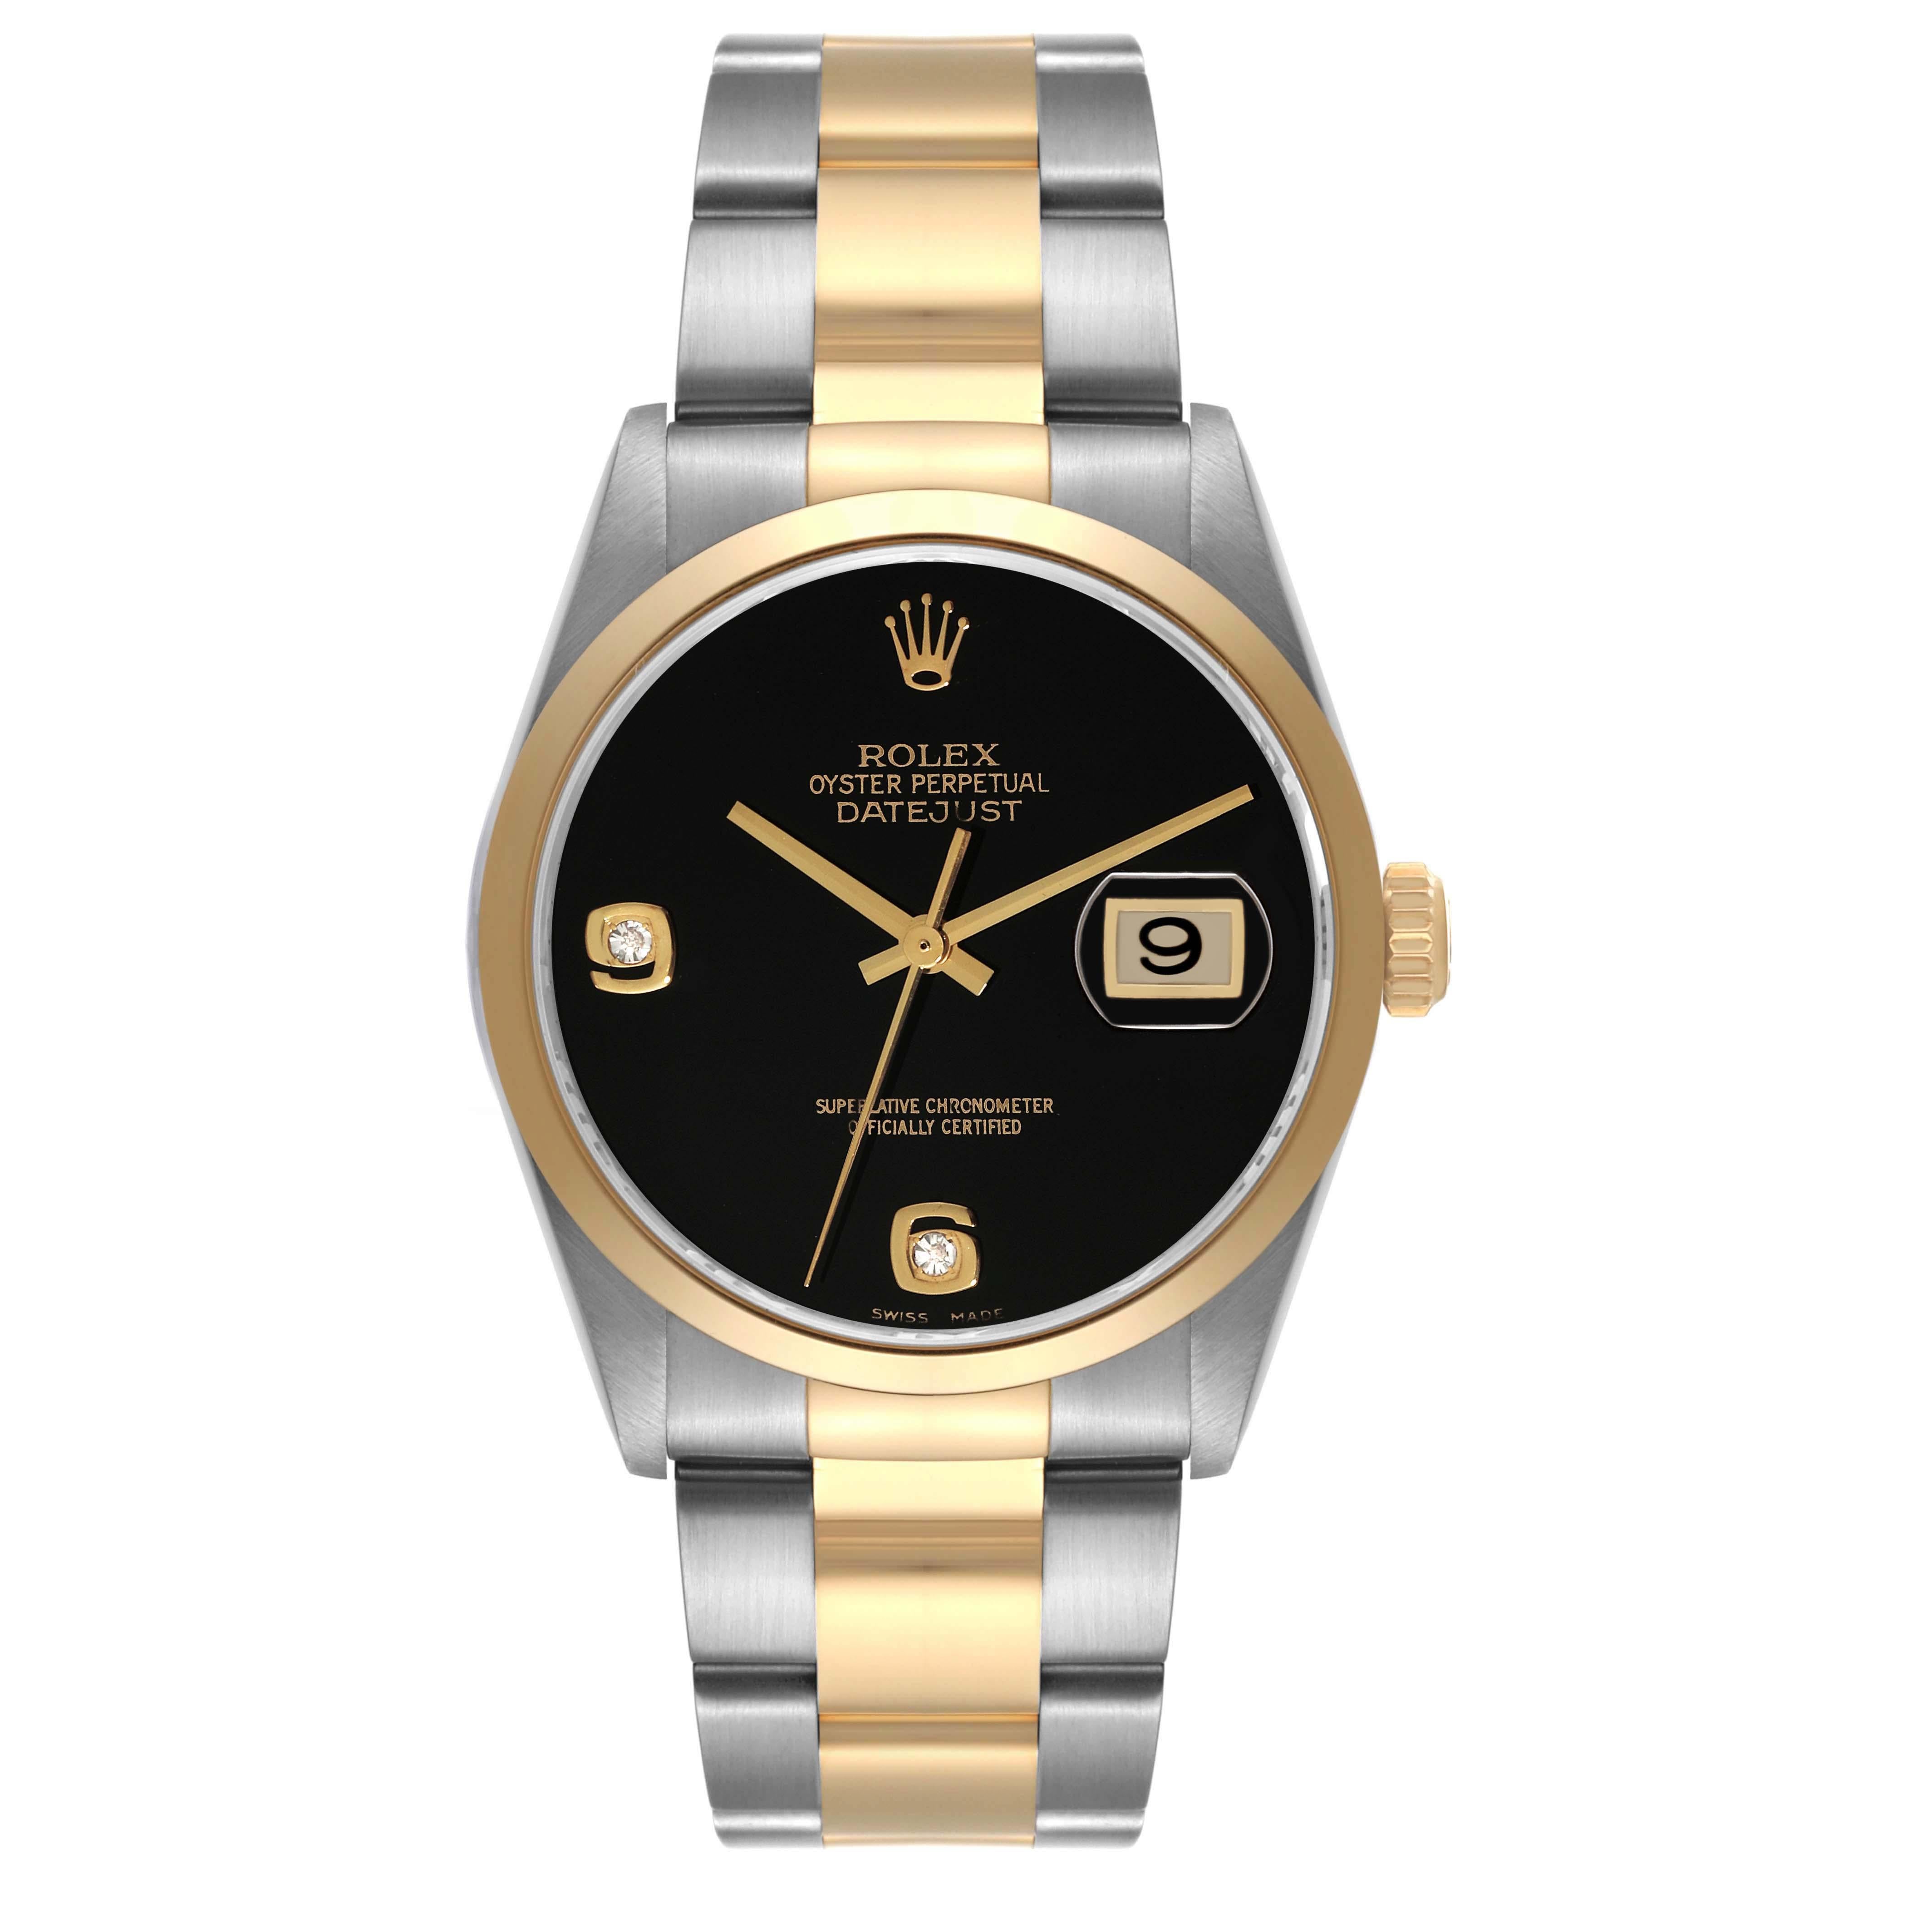 Rolex Datejust Steel Yellow Gold Onyx Diamond Dial Mens Watch 16203 Box Card. Officially certified chronometer automatic self-winding movement. Stainless steel case 36 mm in diameter. Rolex logo on an 18K yellow gold crown. 18k yellow gold smooth